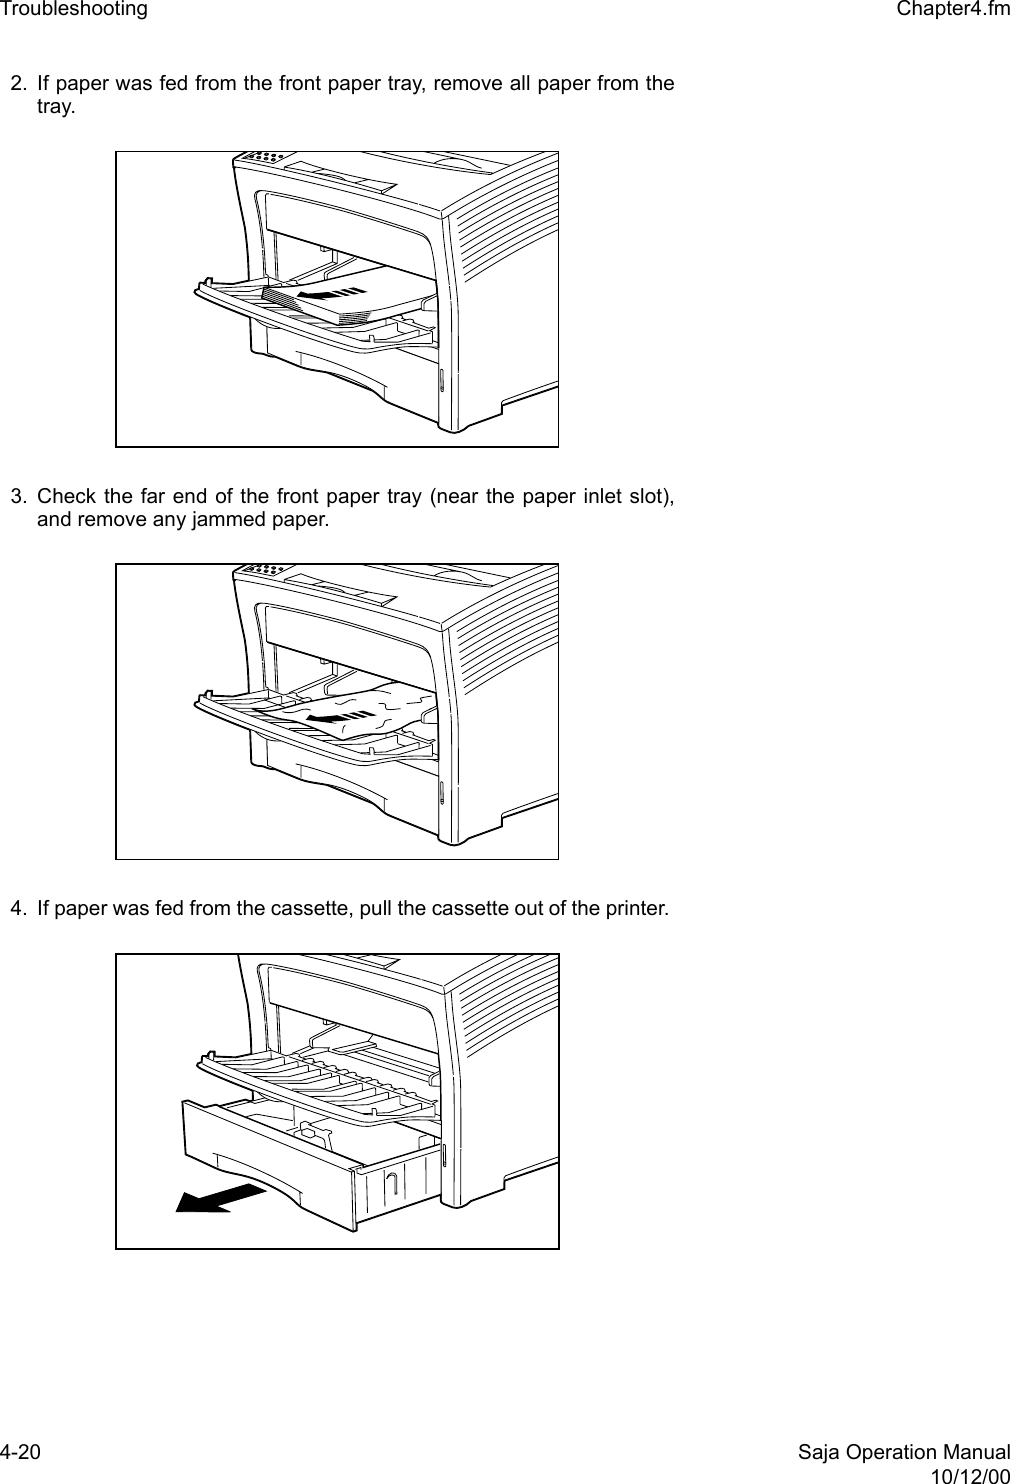 4-20 Saja Operation Manual10/12/00Troubleshooting  Chapter4.fm2. If paper was fed from the front paper tray, remove all paper from thetray. 3. Check the far end of the front paper tray (near the paper inlet slot),and remove any jammed paper. 4. If paper was fed from the cassette, pull the cassette out of the printer. 